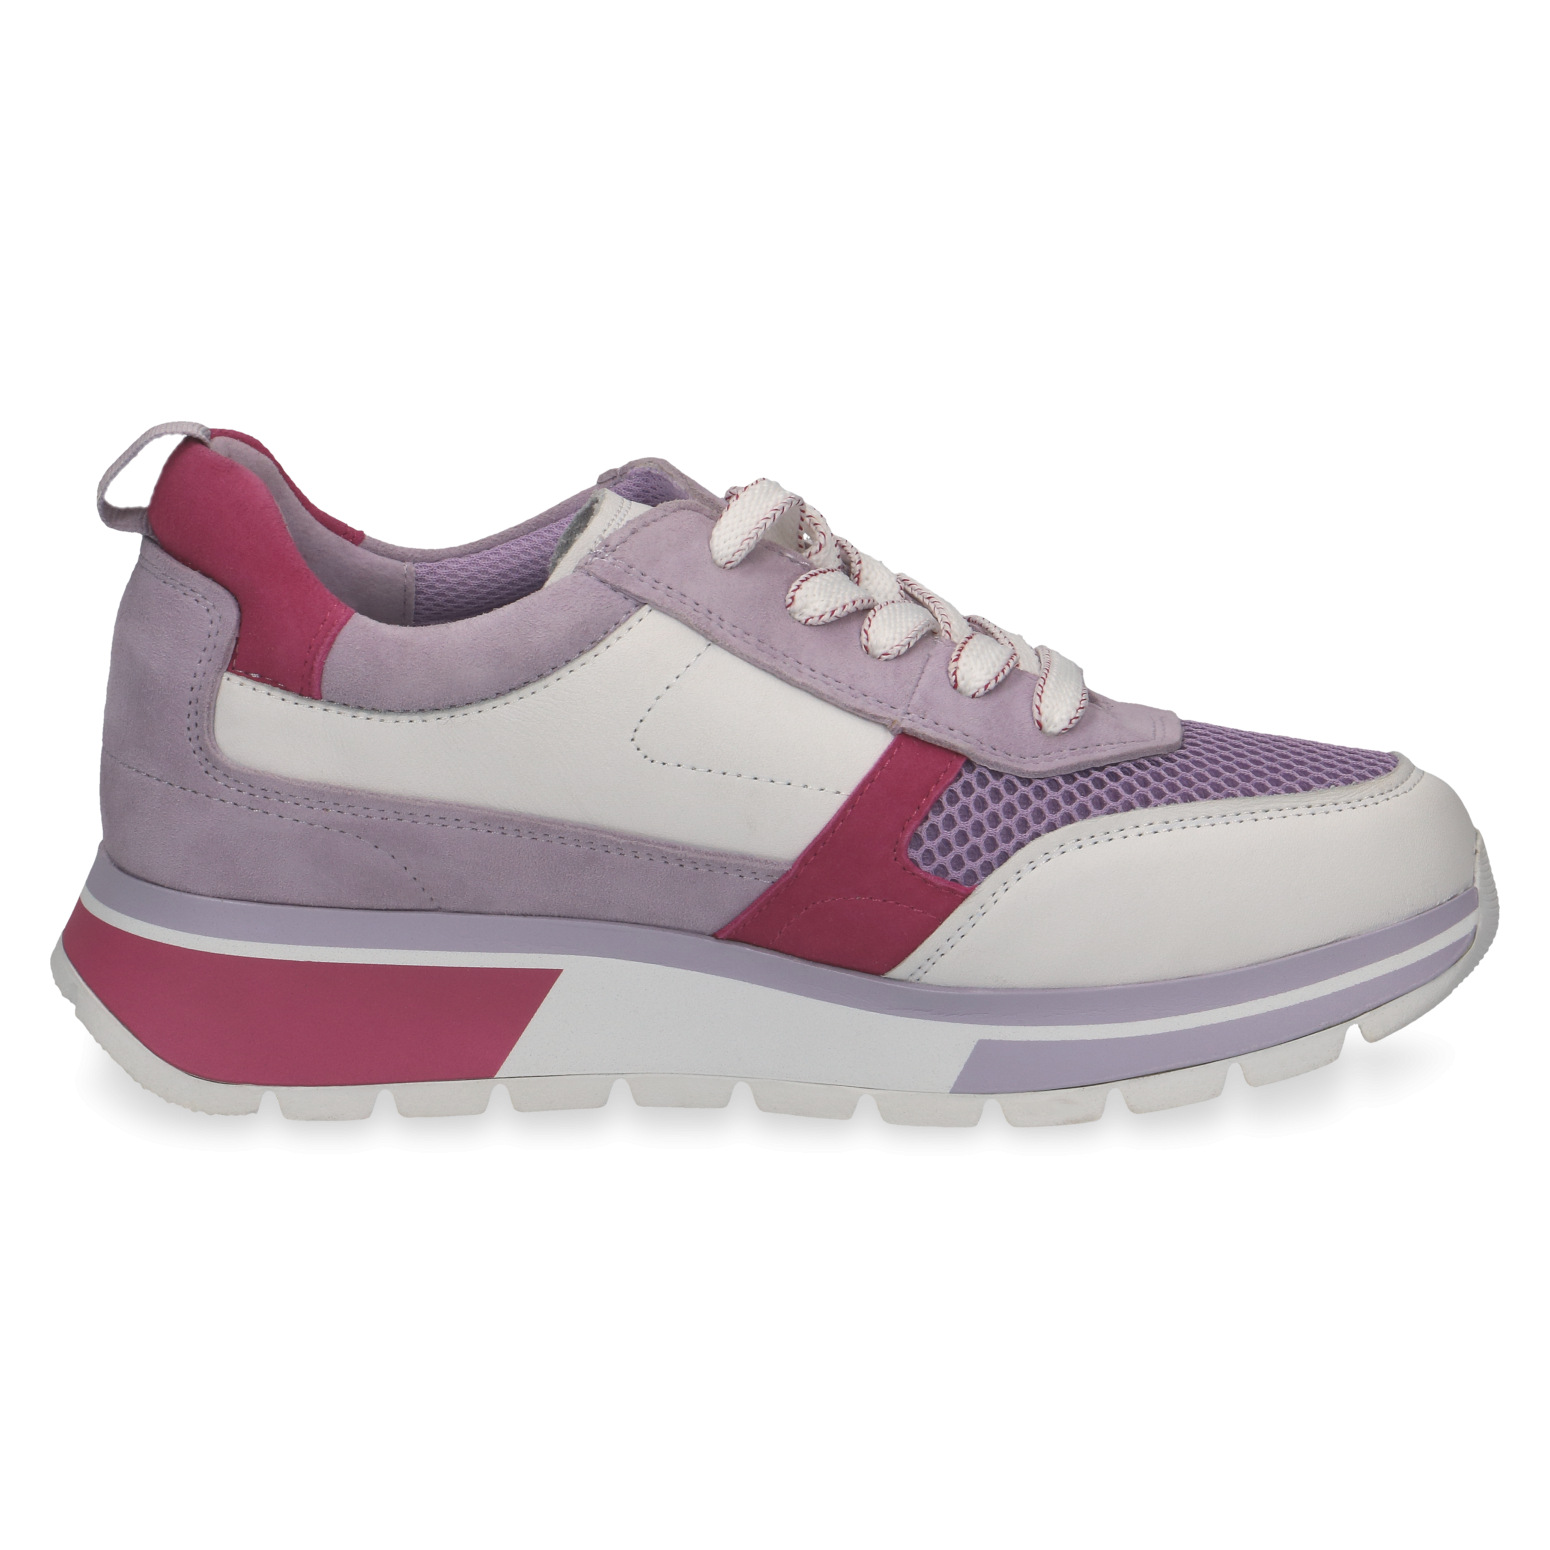 Sneaker - Pink / White Leather/Synthetic